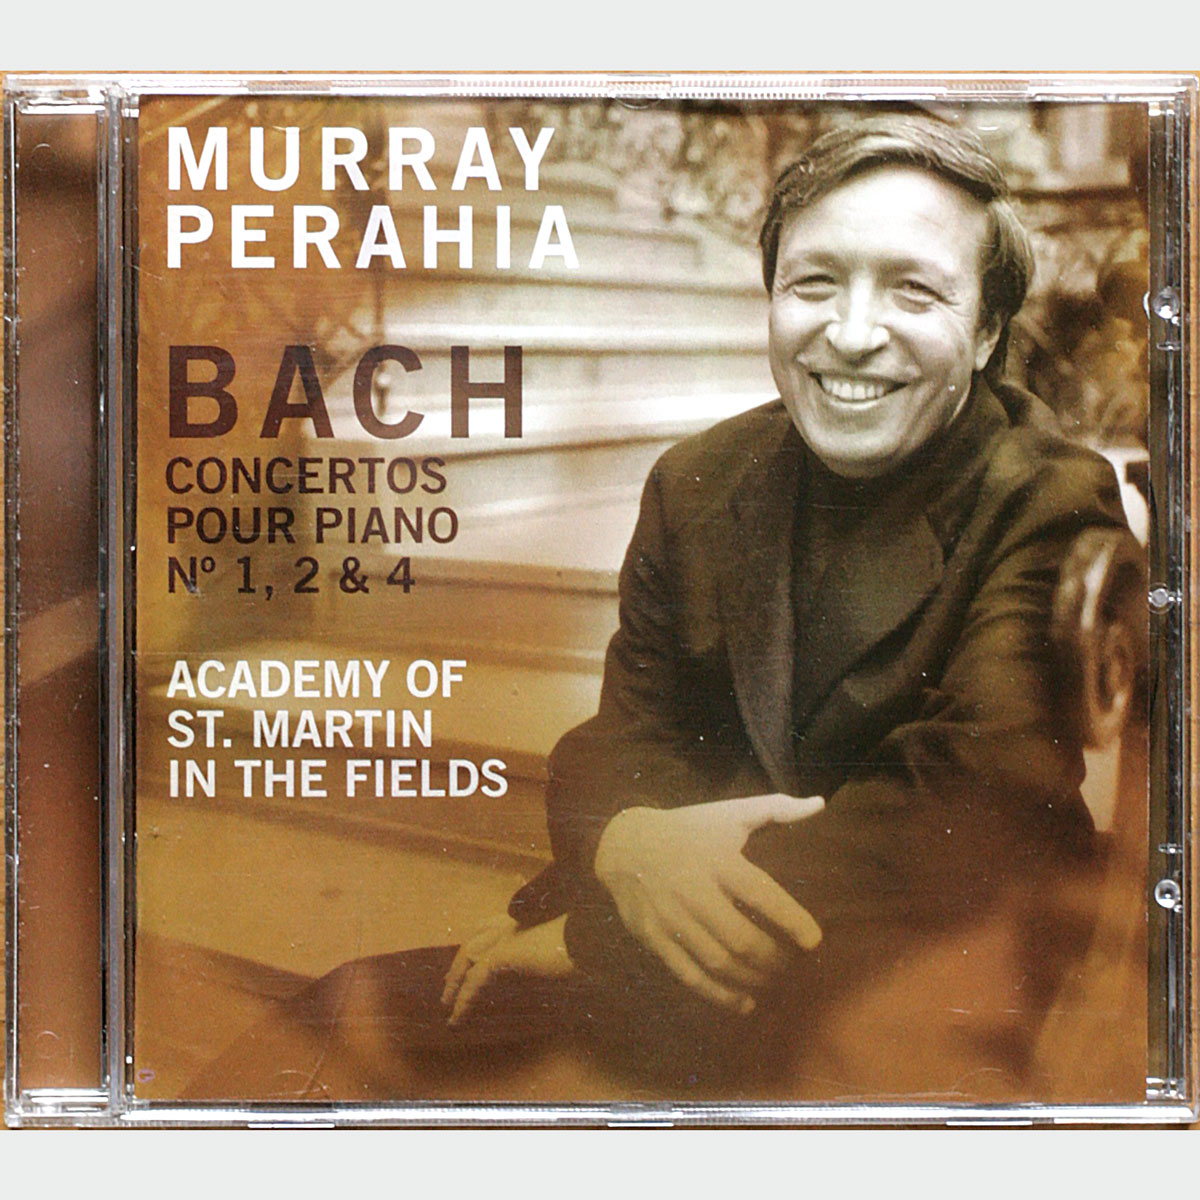 Bach • Concertos pour piano 1 & 2 & 4 • BWV 1052 – 1053 – 1055 • Sony SK 89 245 • Murray Perahia • Academy Of St. Martin In The Fields